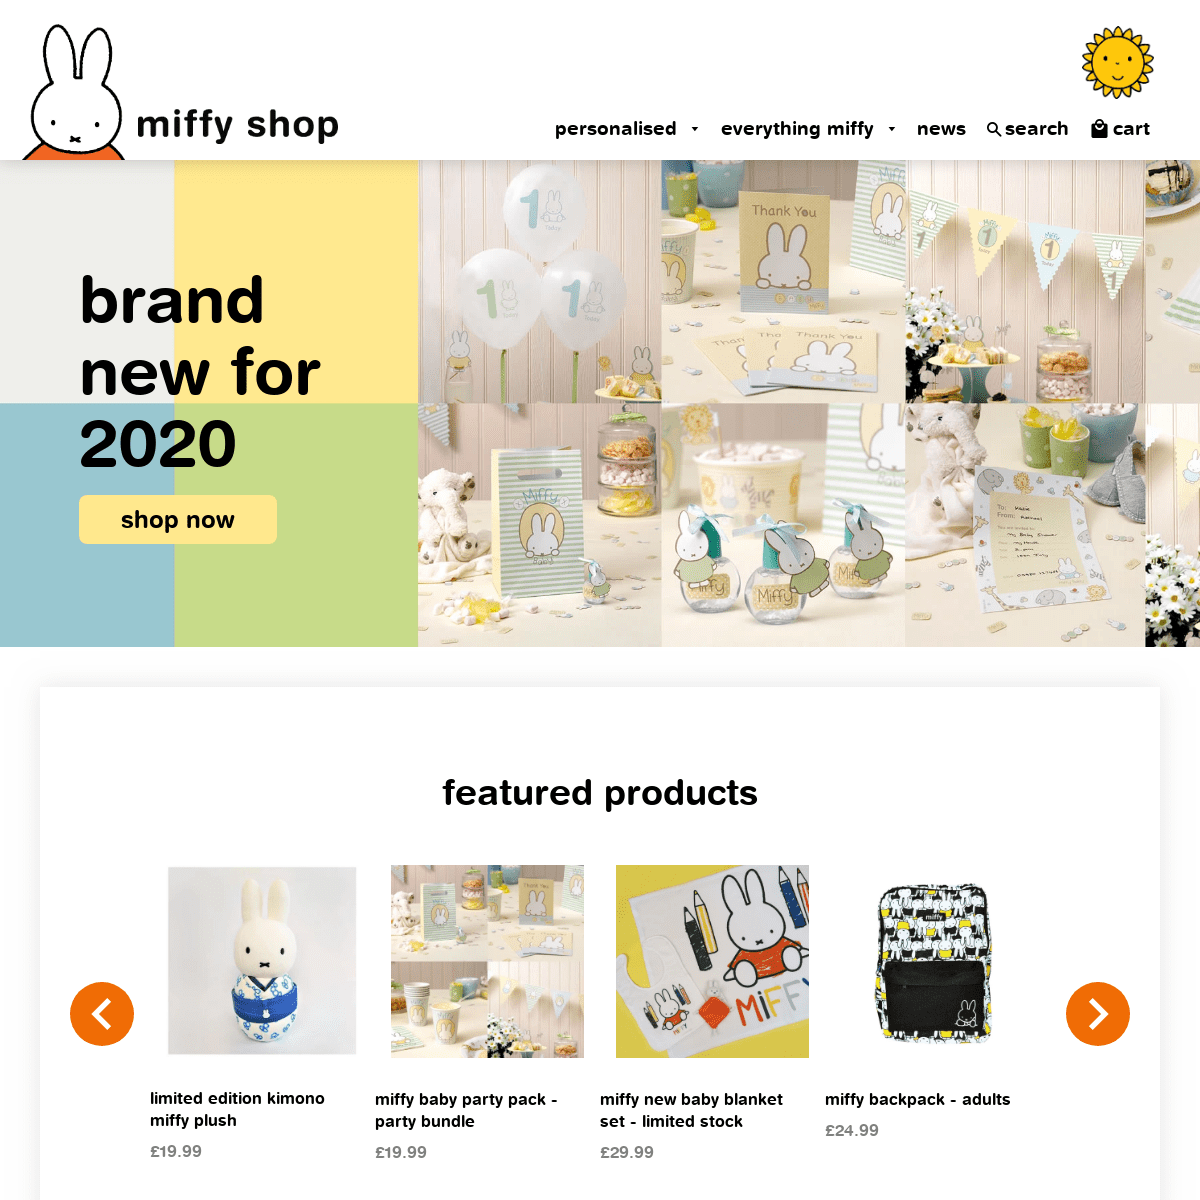 A complete backup of miffyshop.co.uk